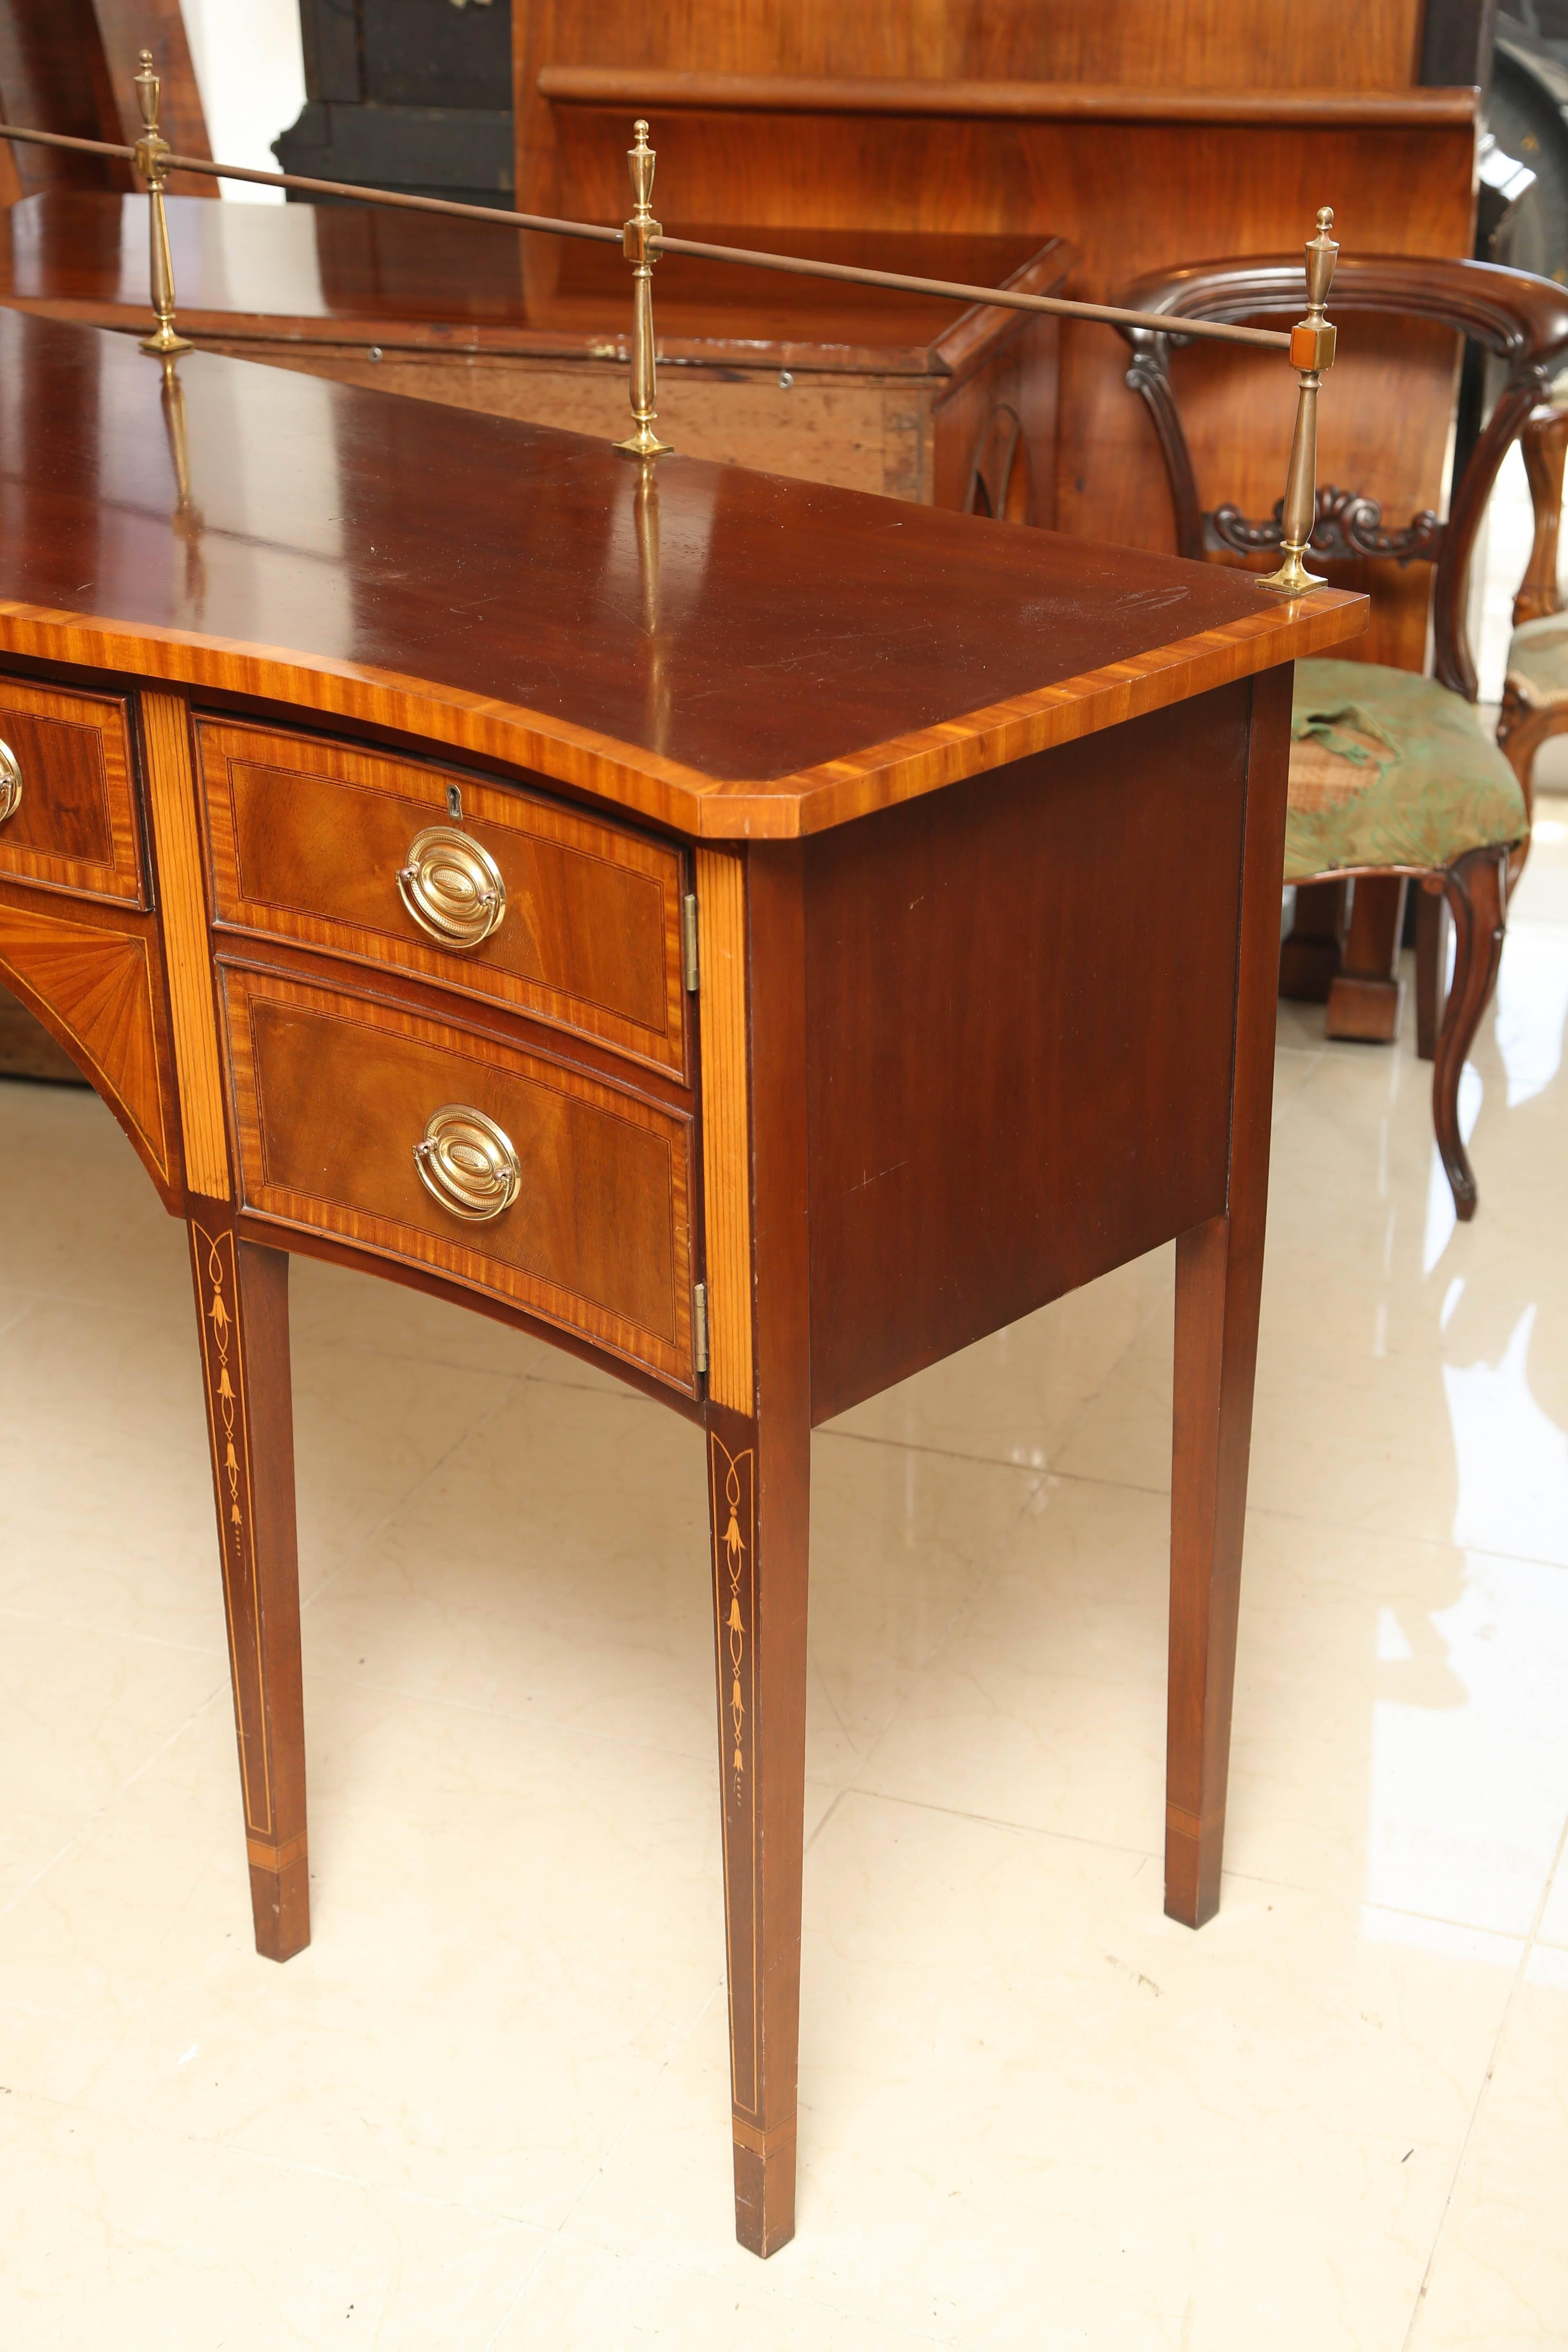 This is a very nice mahogany server made in USA by Couneill.
Its in excellent condition very nice satinwood marquetry inlay sitting on square tapered legs, with a brass gallery to the back.
Original brass handles and also has the original